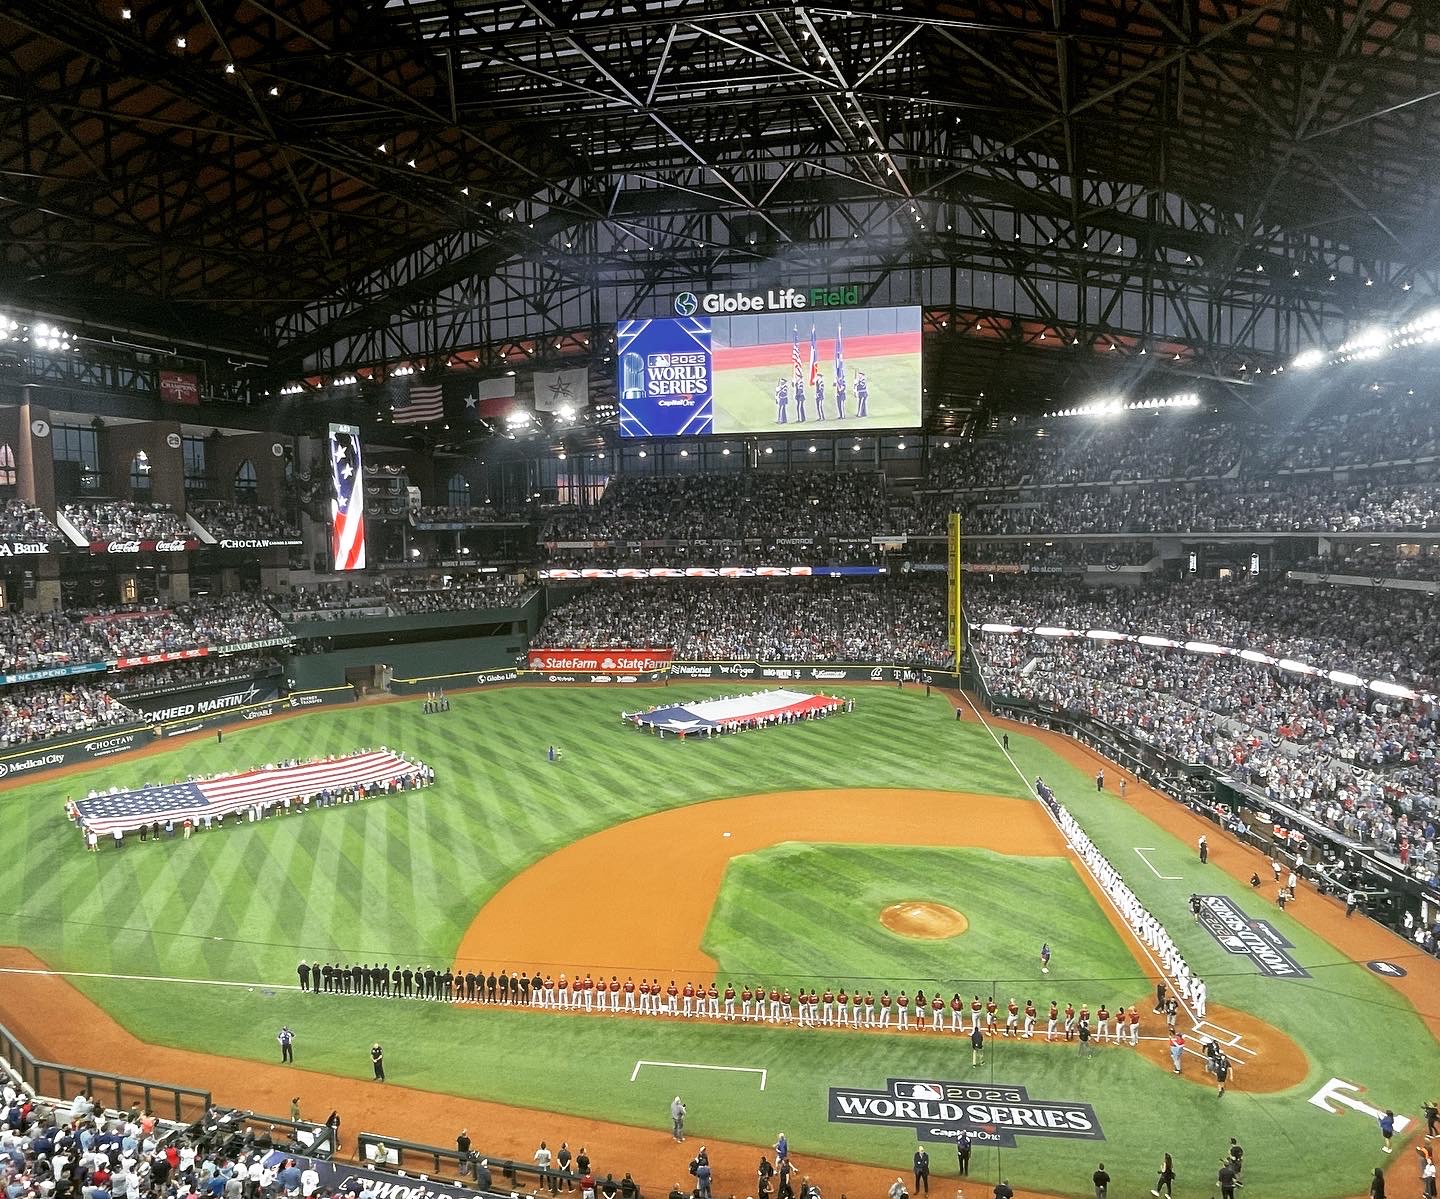 Image of Globe Life Field during game 2 of the 2023 World Series showing both teams lined up along the baselines and people on the field holding the American and Texas flags.